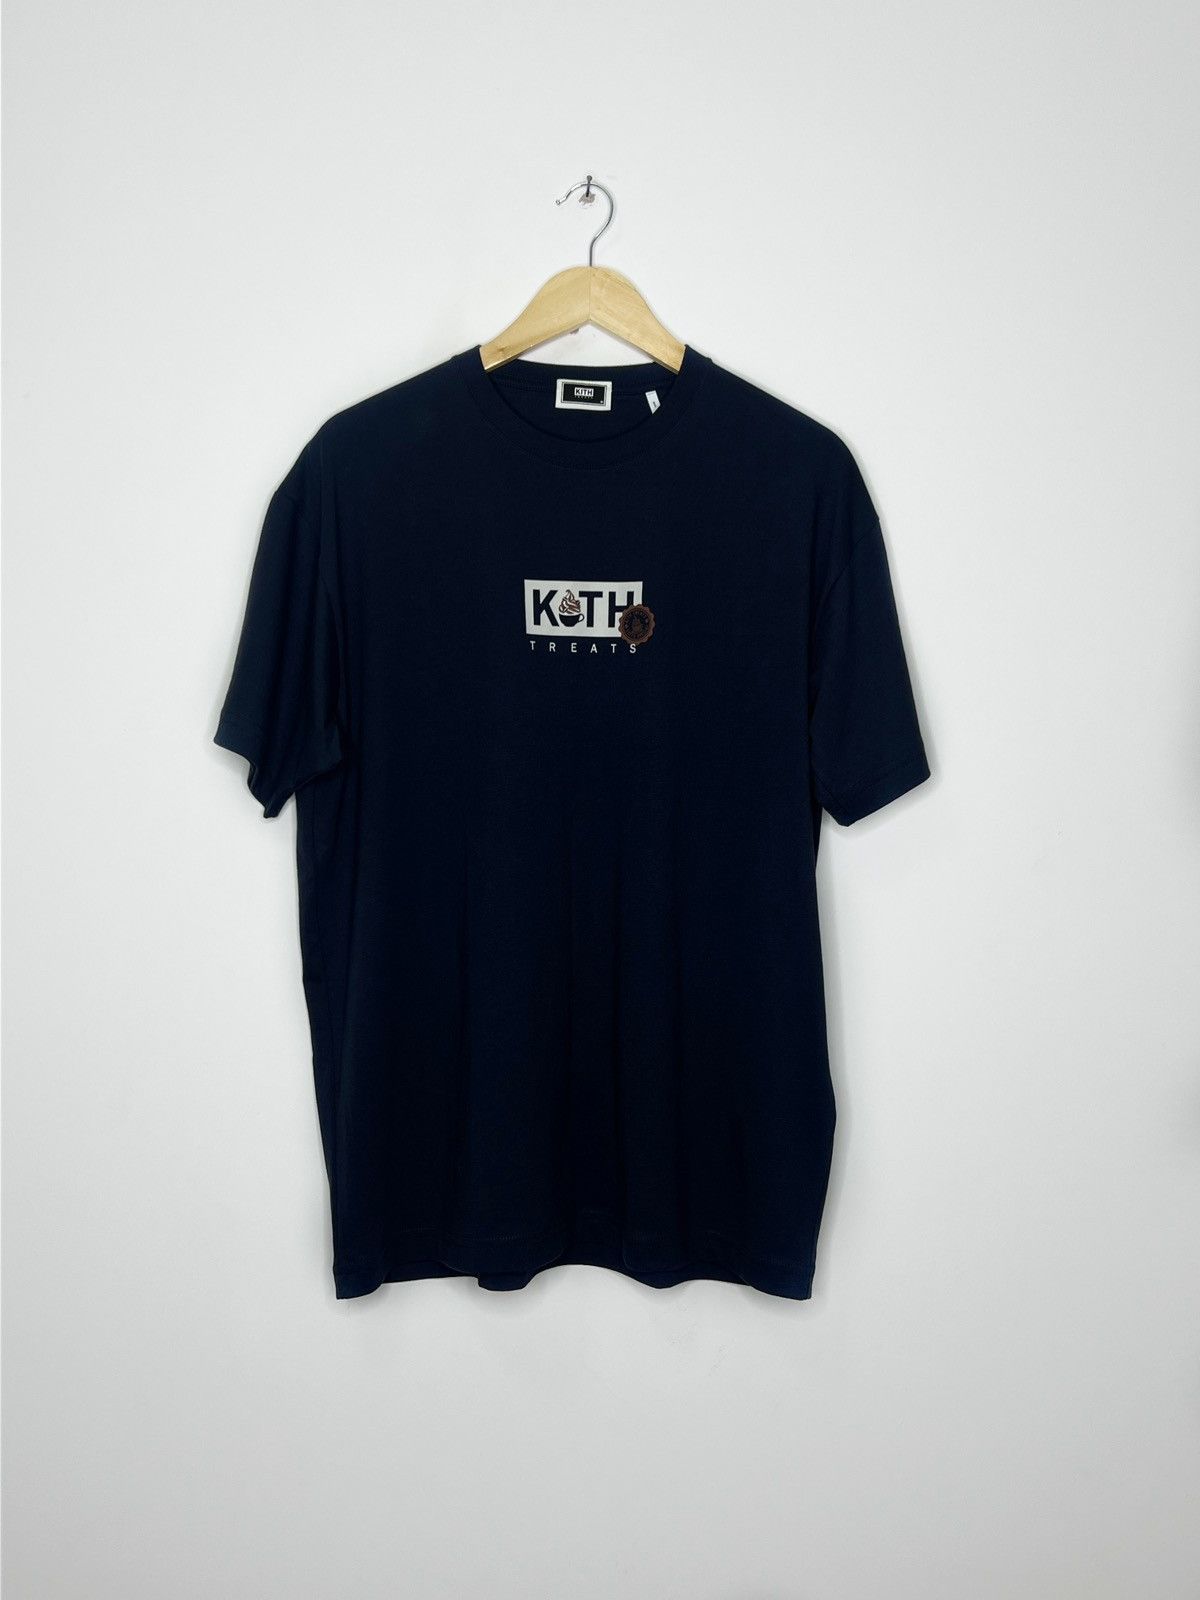 Vintage Kith Treats Coffee Stamp Nocturnal Tee | Grailed